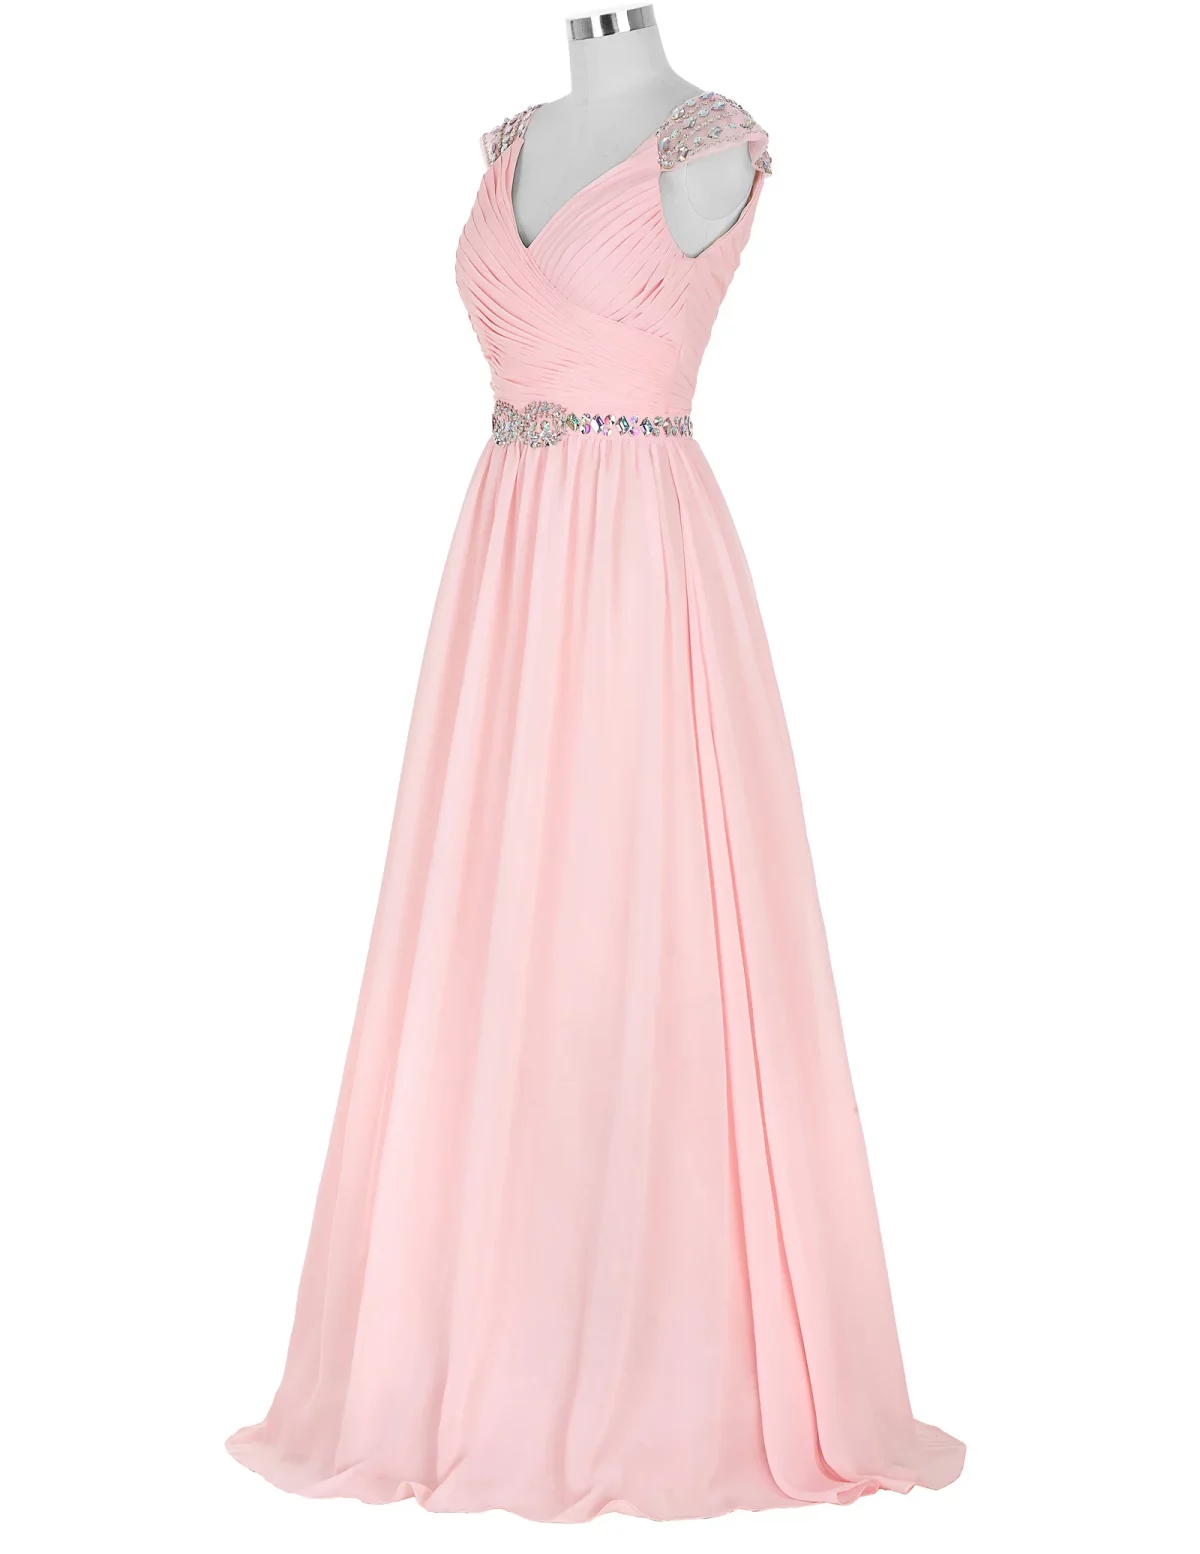 Pink Chiffon V Neck Beaded A Line Capped Sleeve Maid Of Honor Long Bridesmaid Dress in Bridesmaid dresses